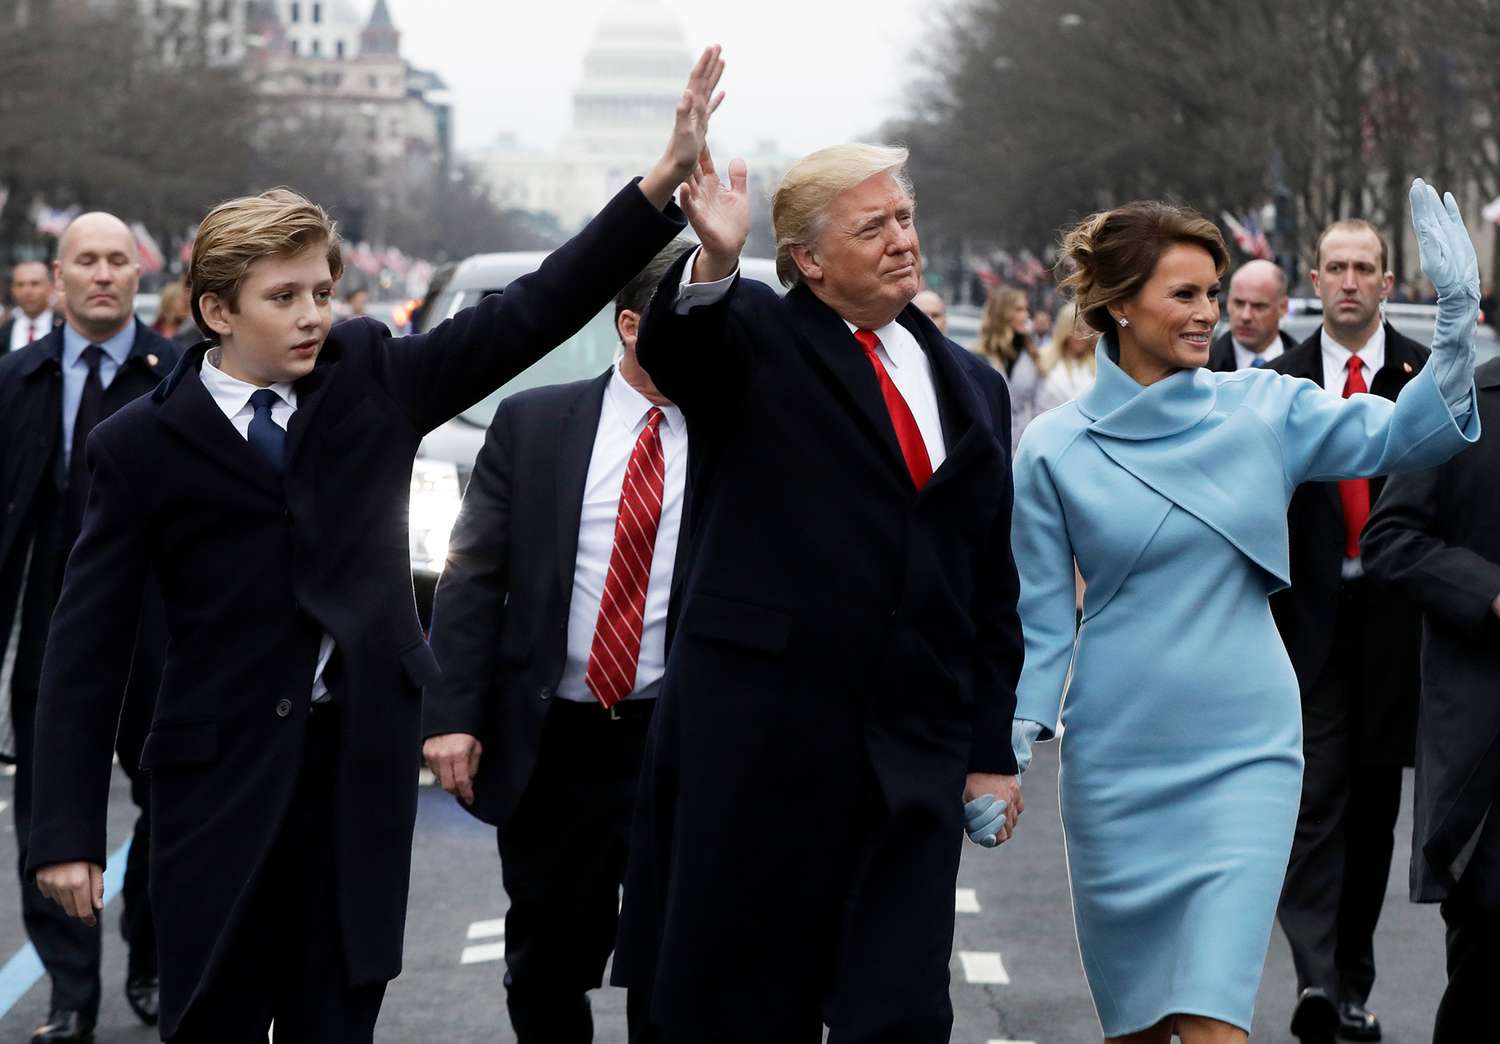 U.S. President Donald Trump waves to supporters as he walks the parade route with first lady Melania Trump and son Barron Trump after being sworn in at the 58th Presidential Inauguration 